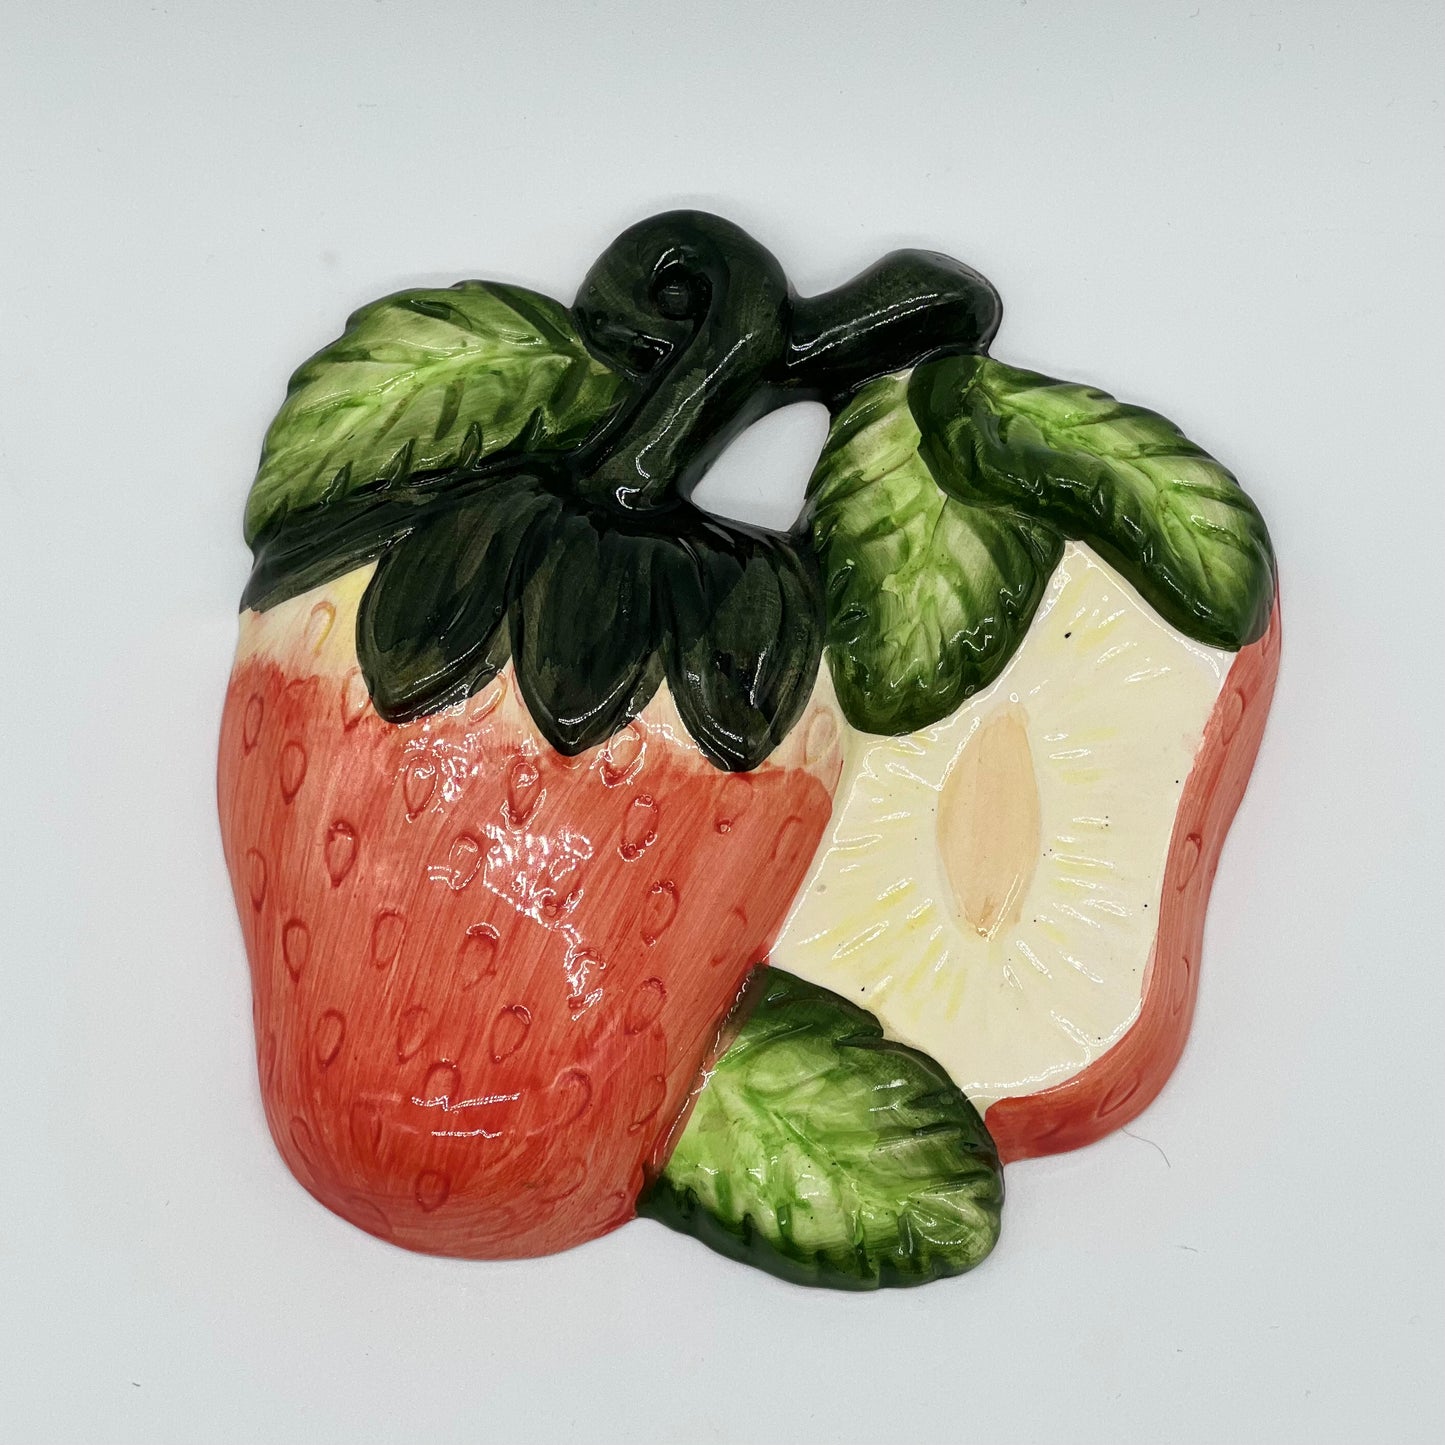 Vintage MCM Ceramic Wall Hanging Fruit Plaques, Set of 4 (Grape, Pear, Peach, Strawberry)